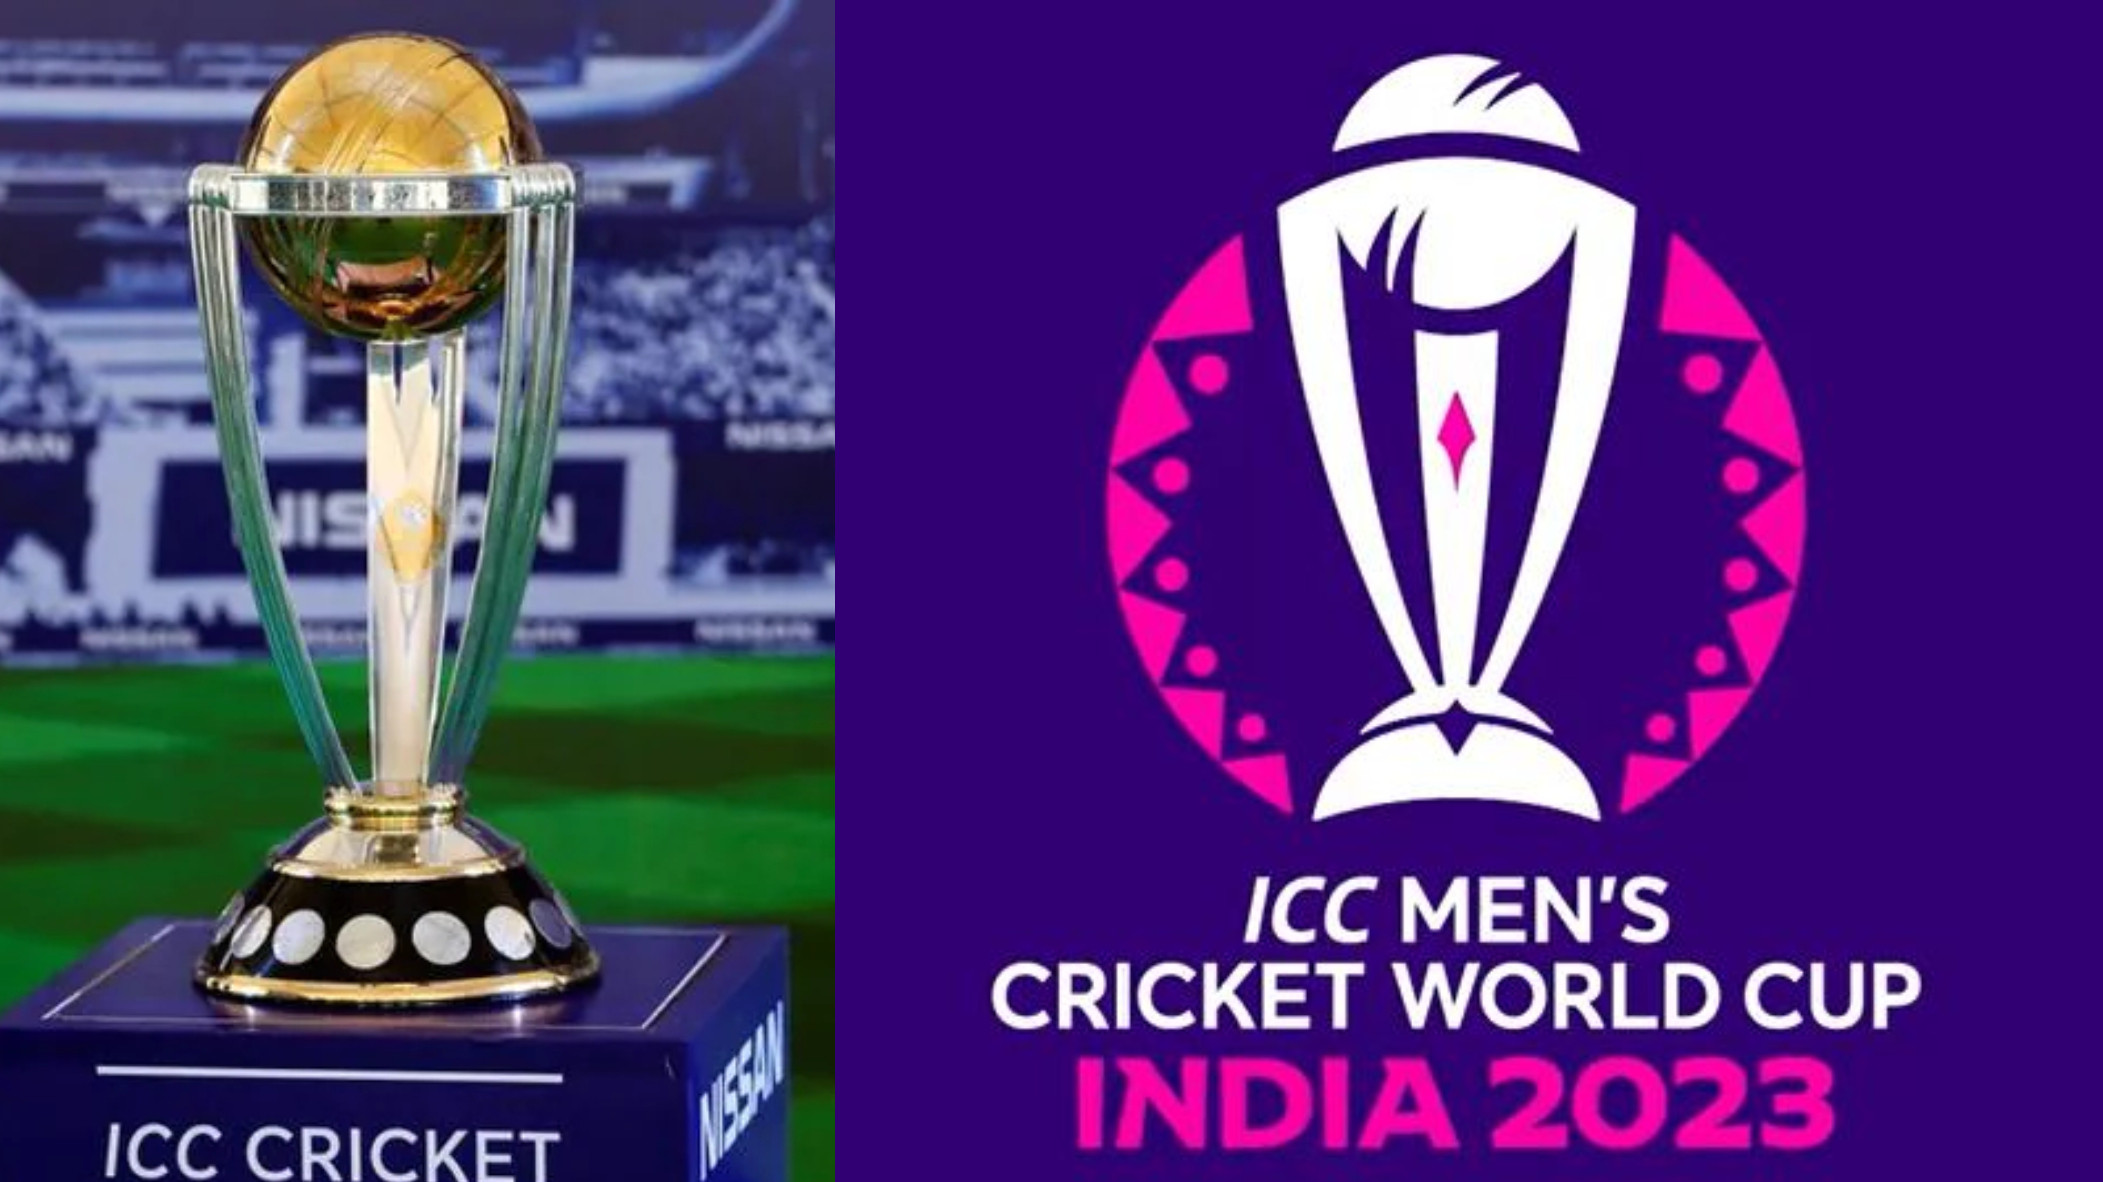 ICC reveals ODI World Cup 2023 logo on 12th anniversary of India’s 2011 title win